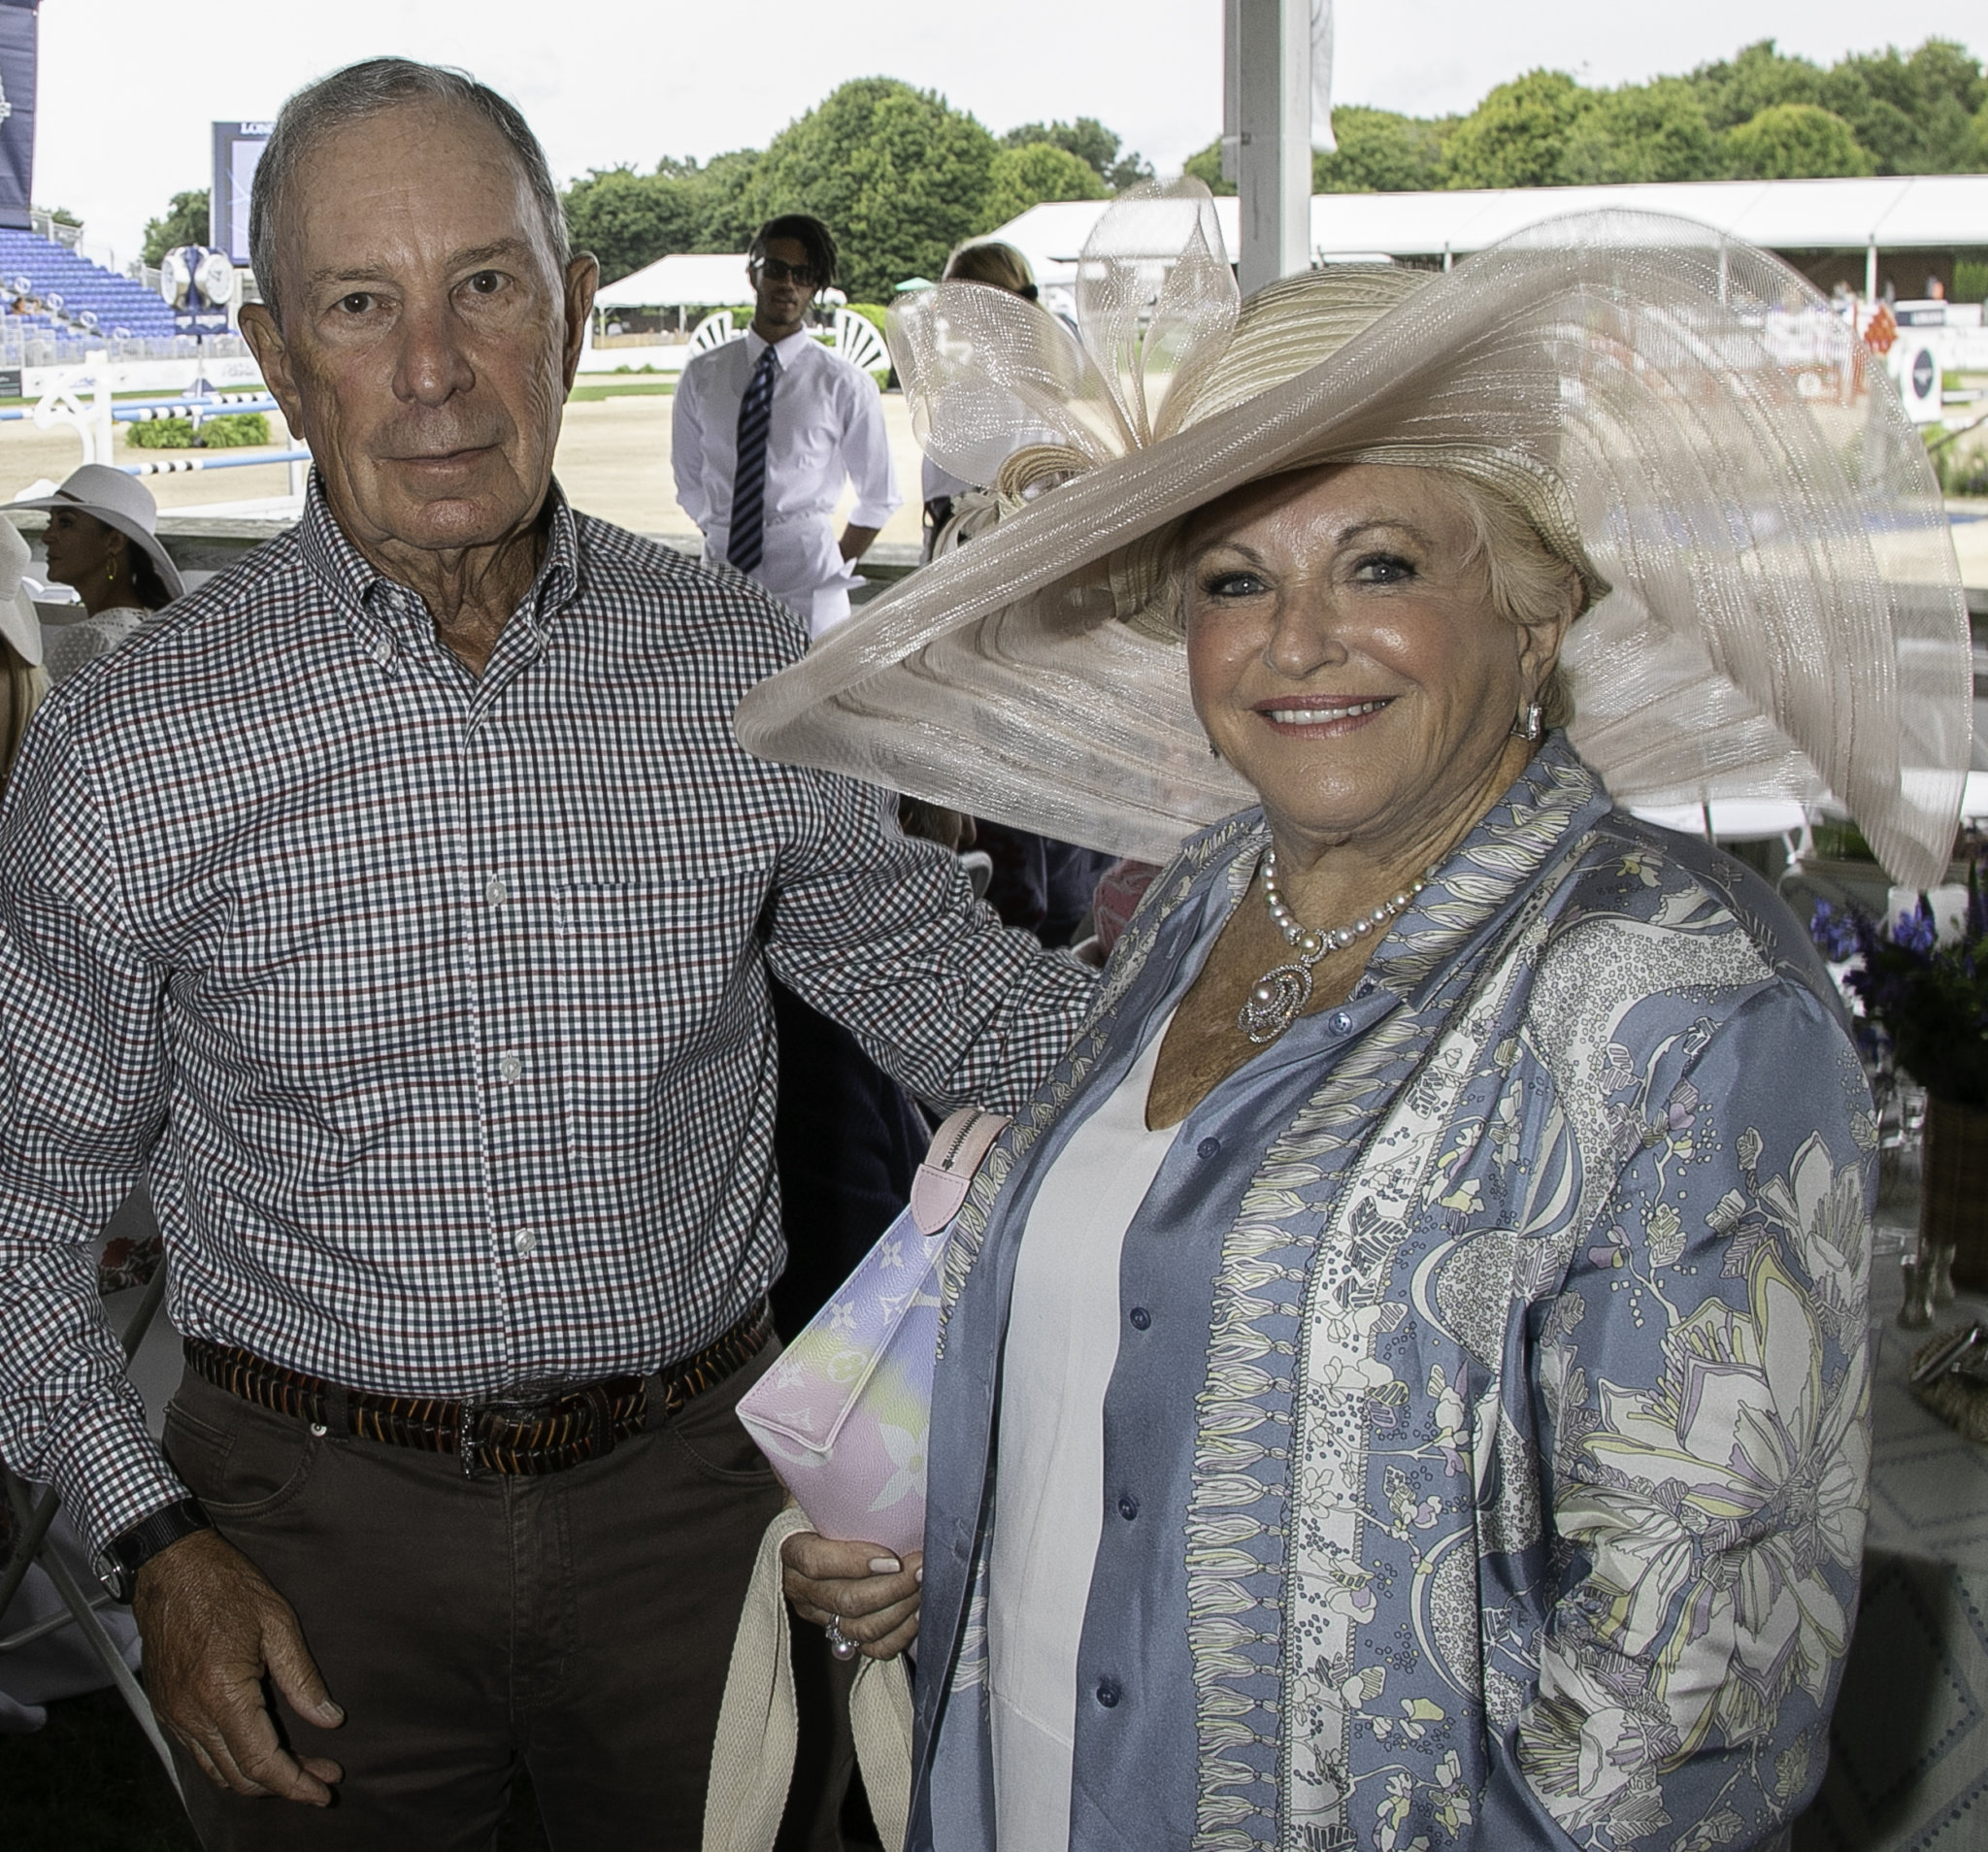 Victoria Schneps with Mayor Michael Bloomberg at the 2021 Hampton Classic